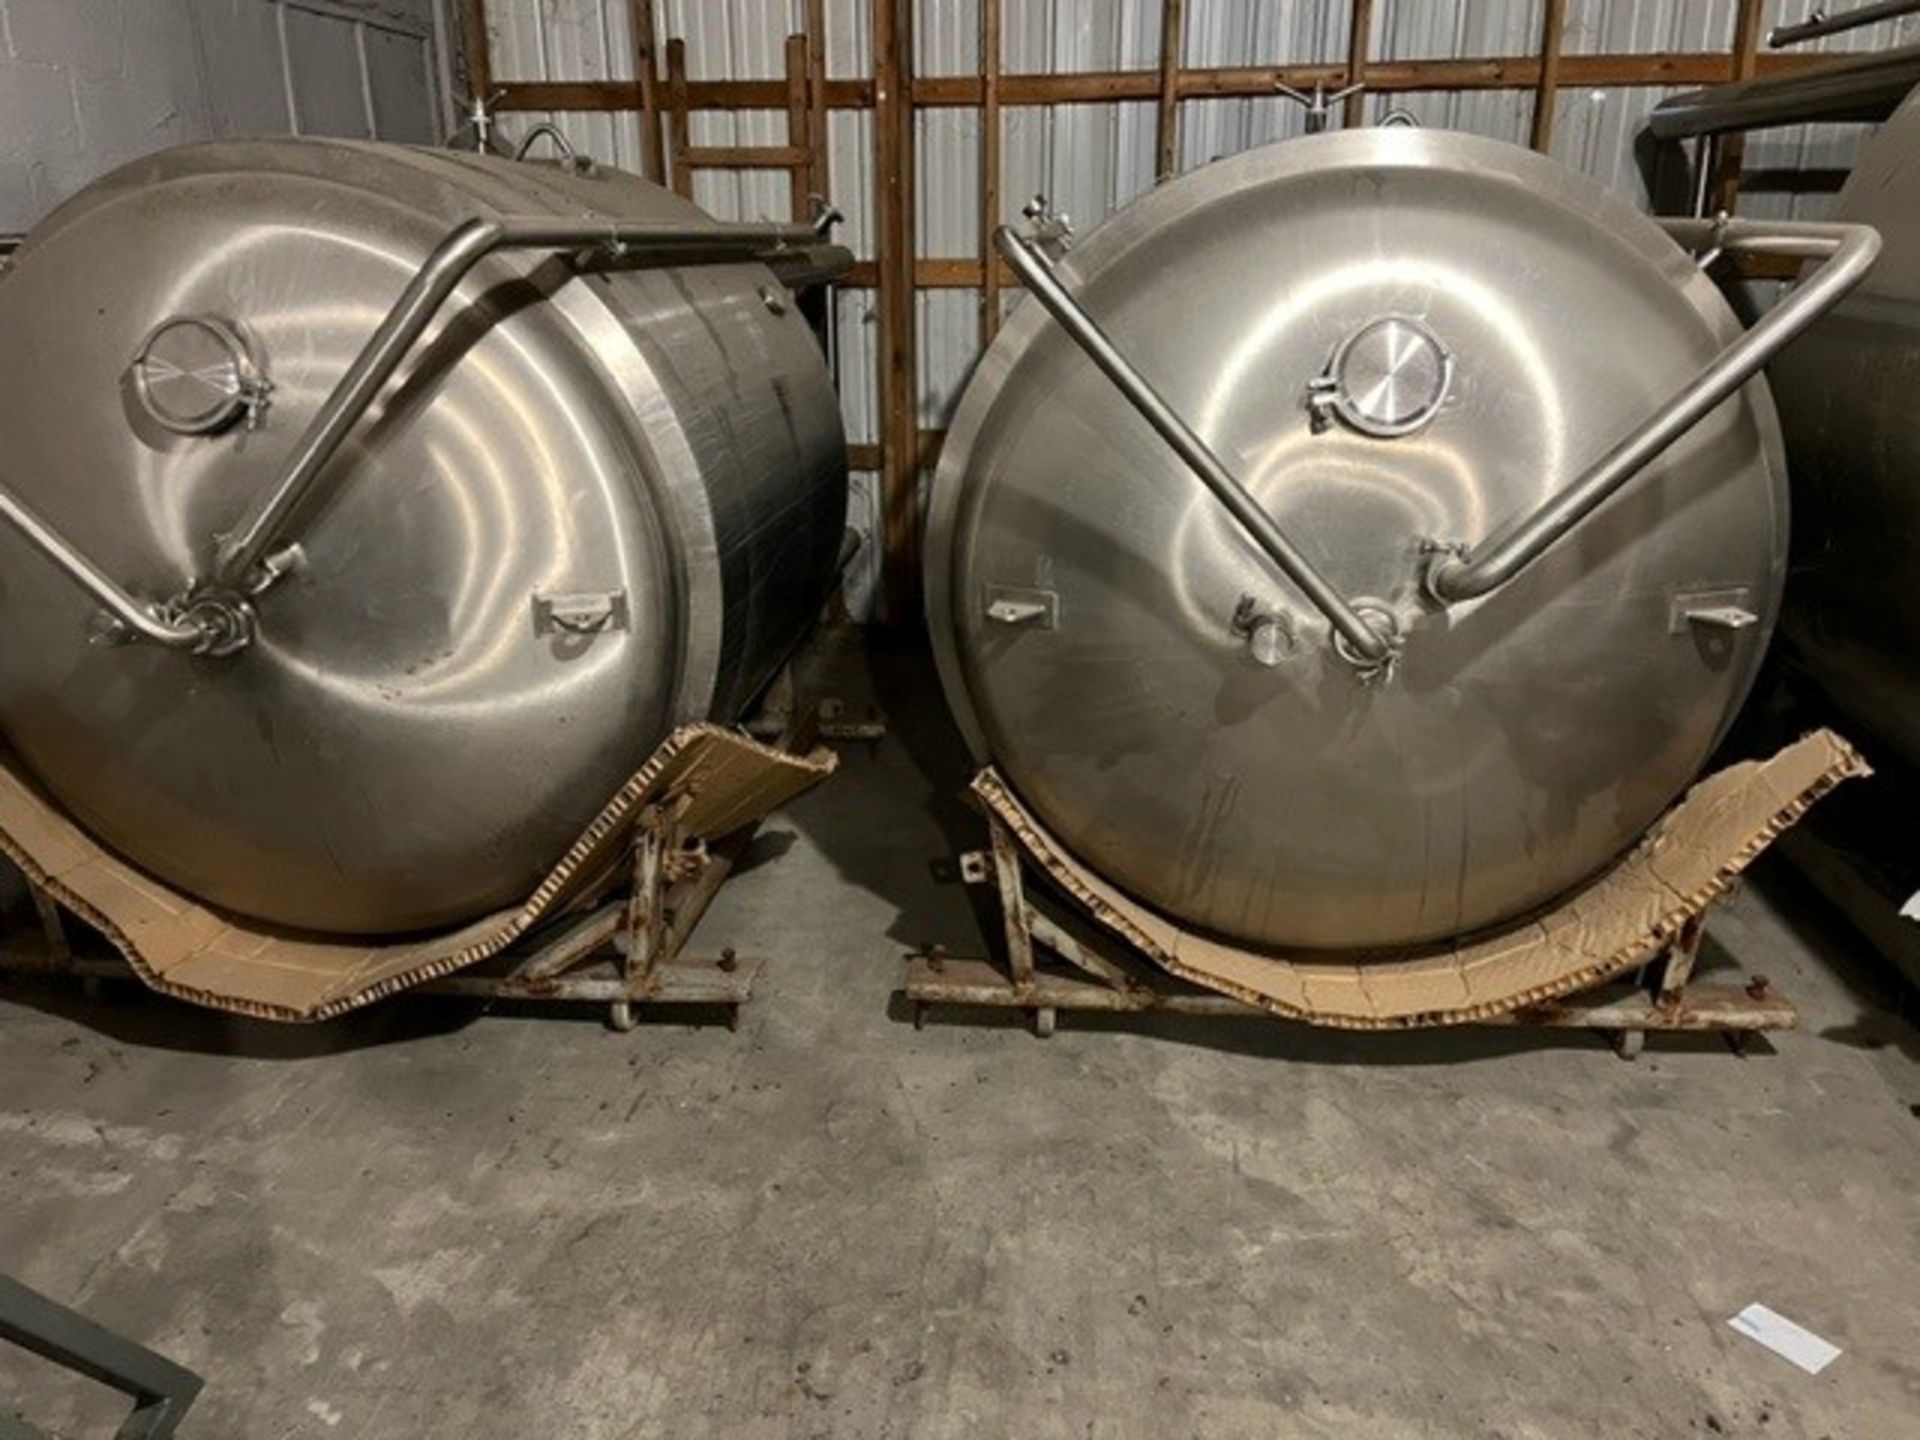 Consignment Item - located in Breese, IL: NEVER USED, Kent 20 bbl Beer Fermenter, from 2014 - Image 5 of 5